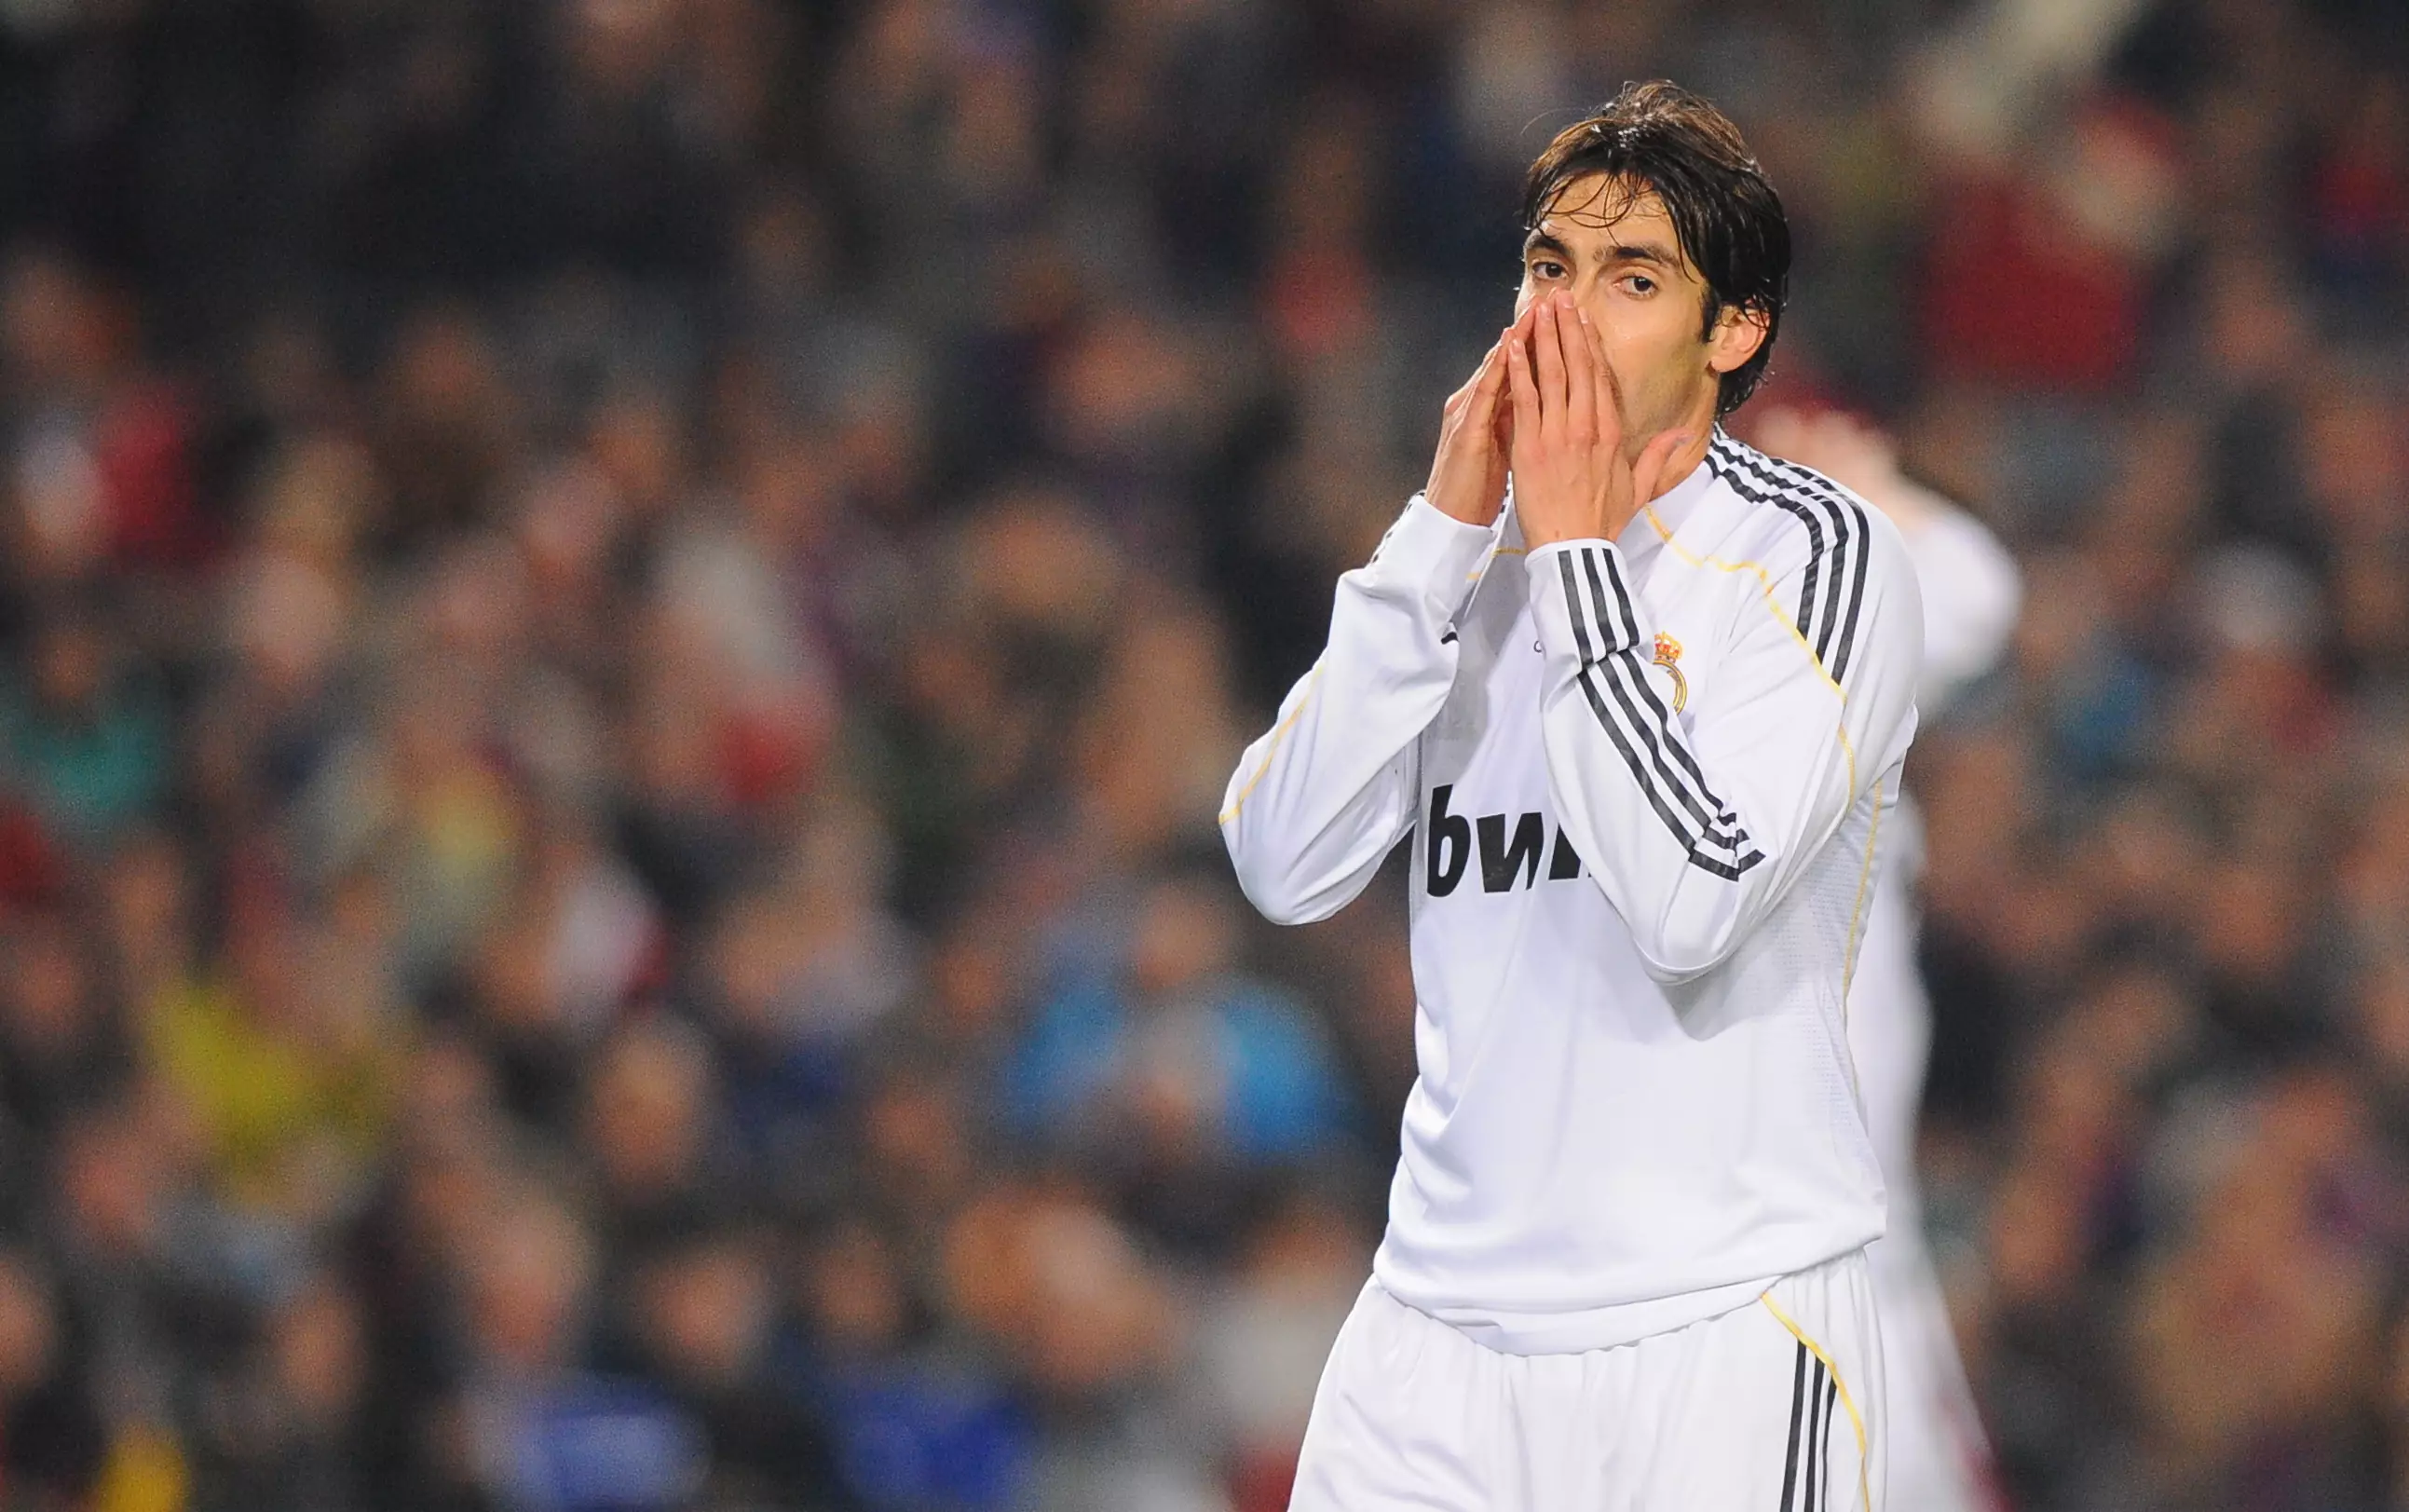 Kaka in action for Real Madrid. Image: PA